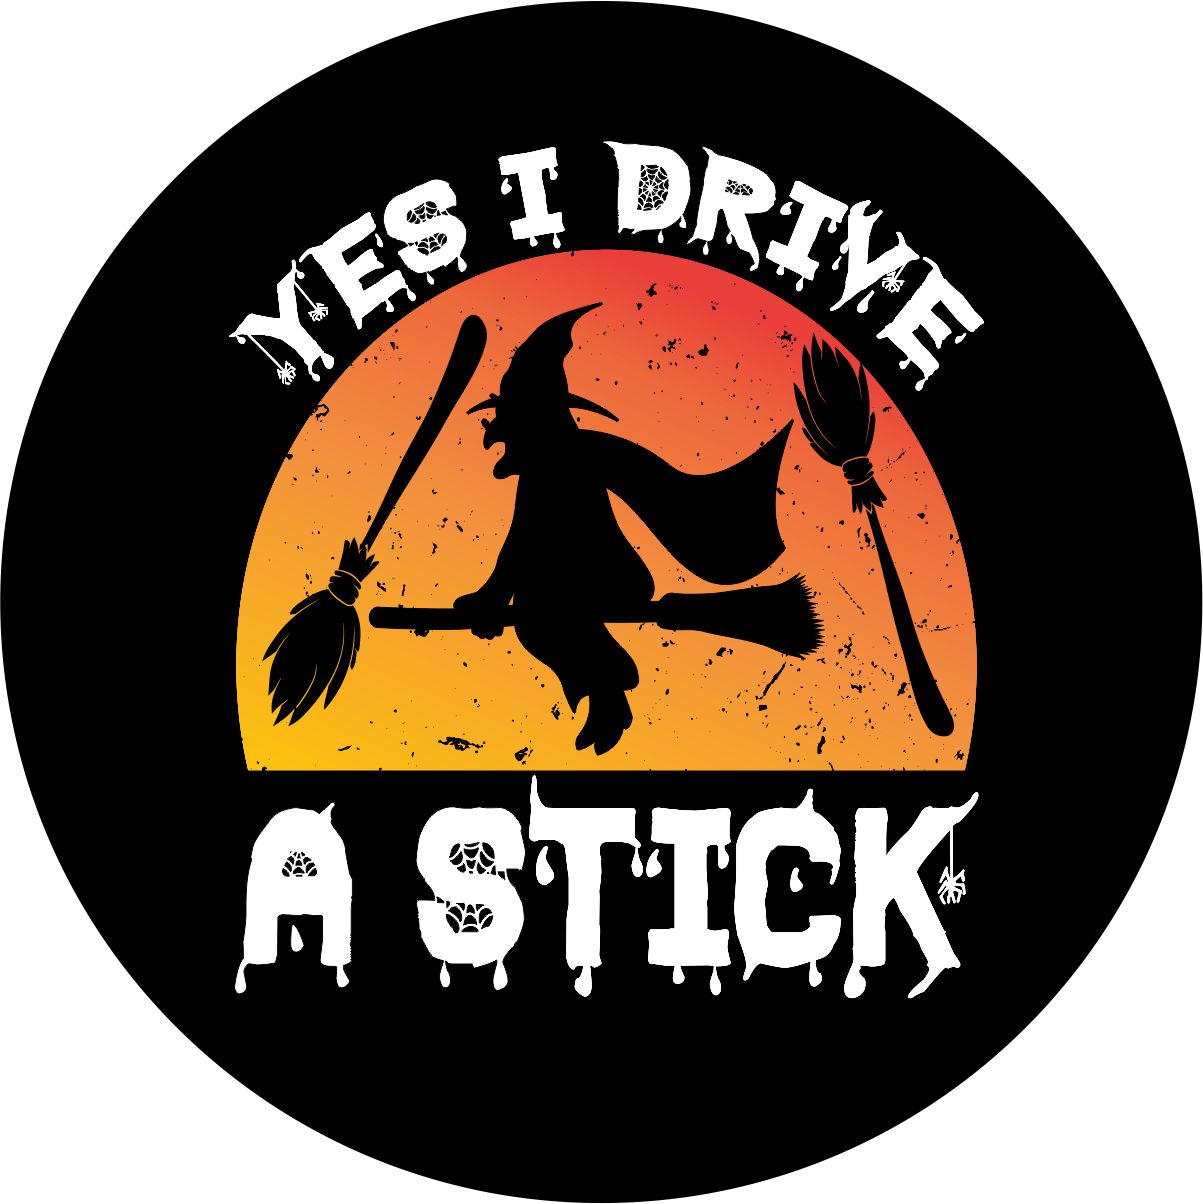 Silhouette of a watch flying on a broom with orange gradient and the saying "yes I drive a stick" in spooky text as a spare tire cover design for Jeep, RV, Bronco, Camper, and more